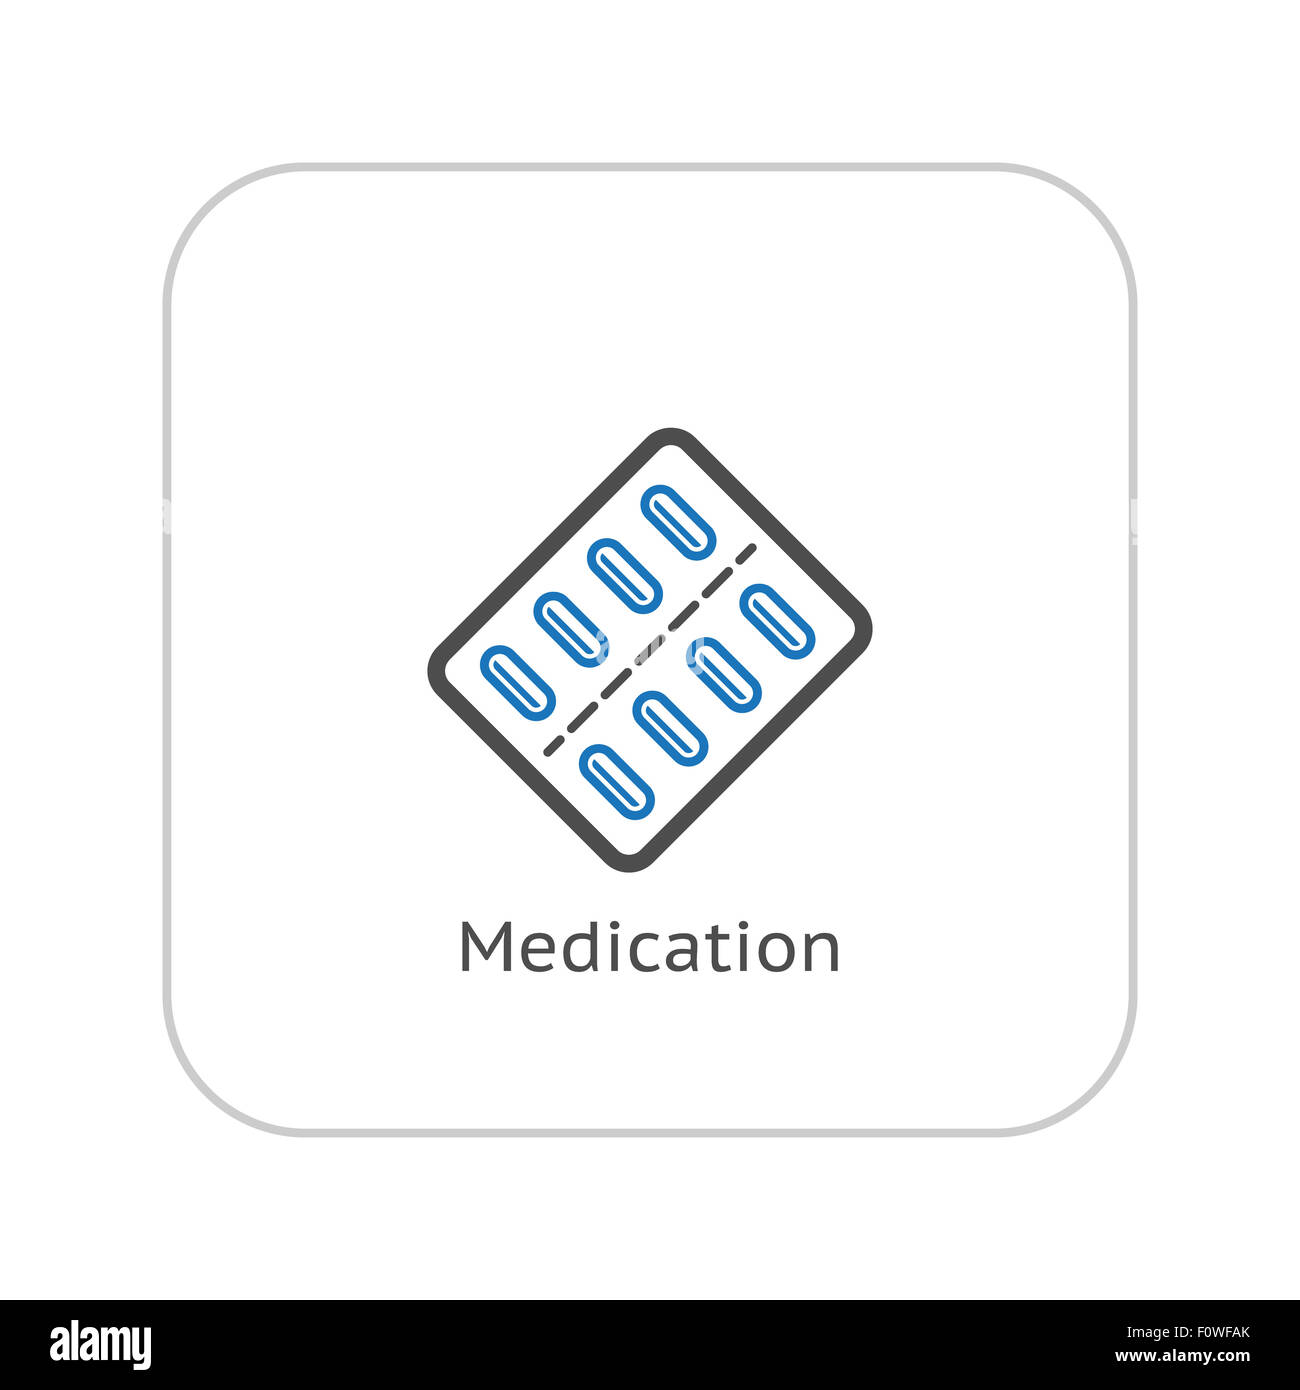 Medication and Medical Services Icon. Flat Design. Isolated. Stock Photo